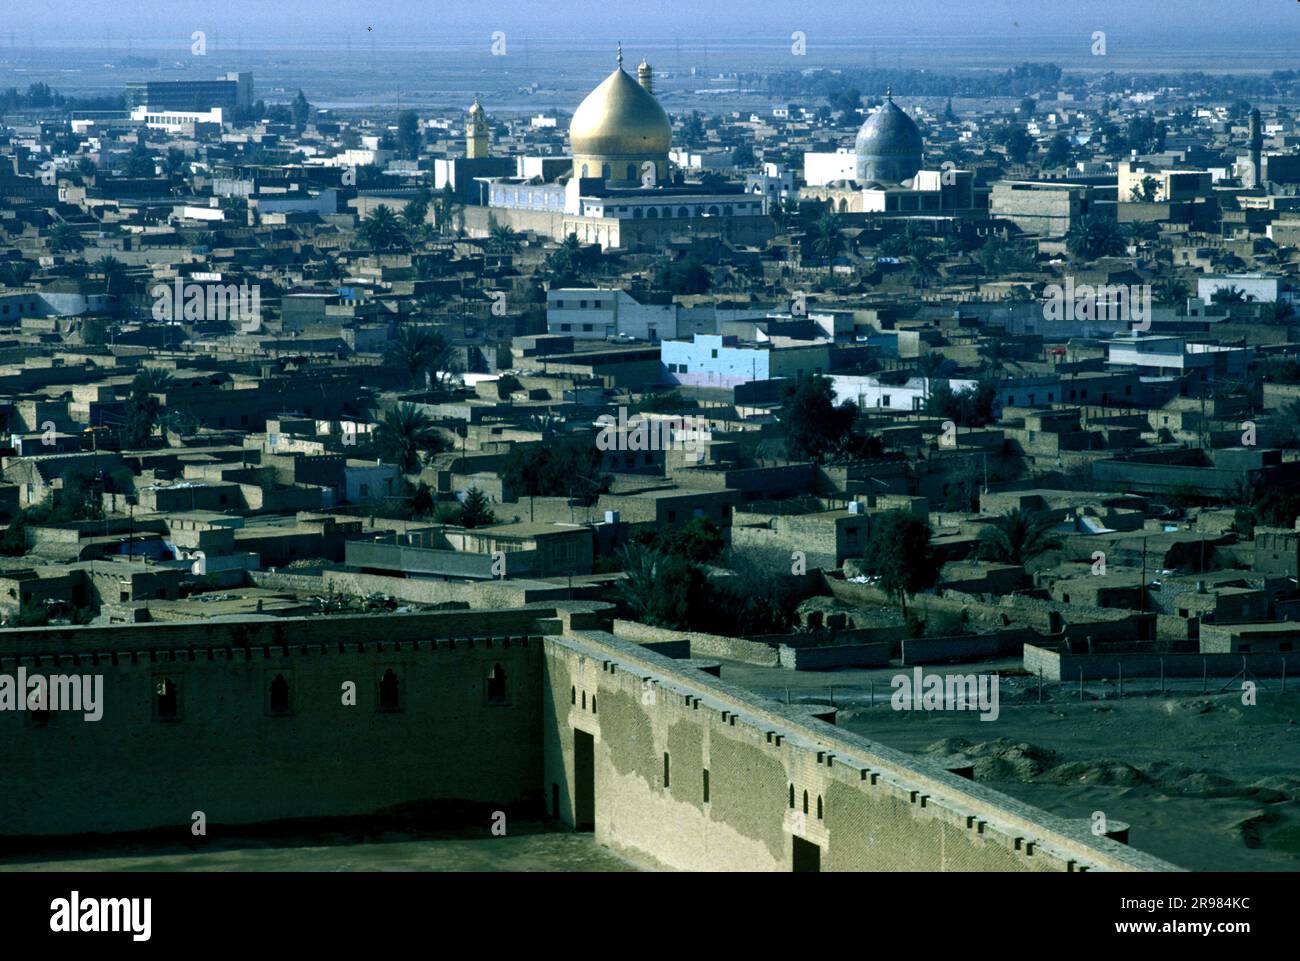 View of Samarra from the Great Mosque, urban with the al-Askari Shrine, centre background, IRAQ Stock Photo